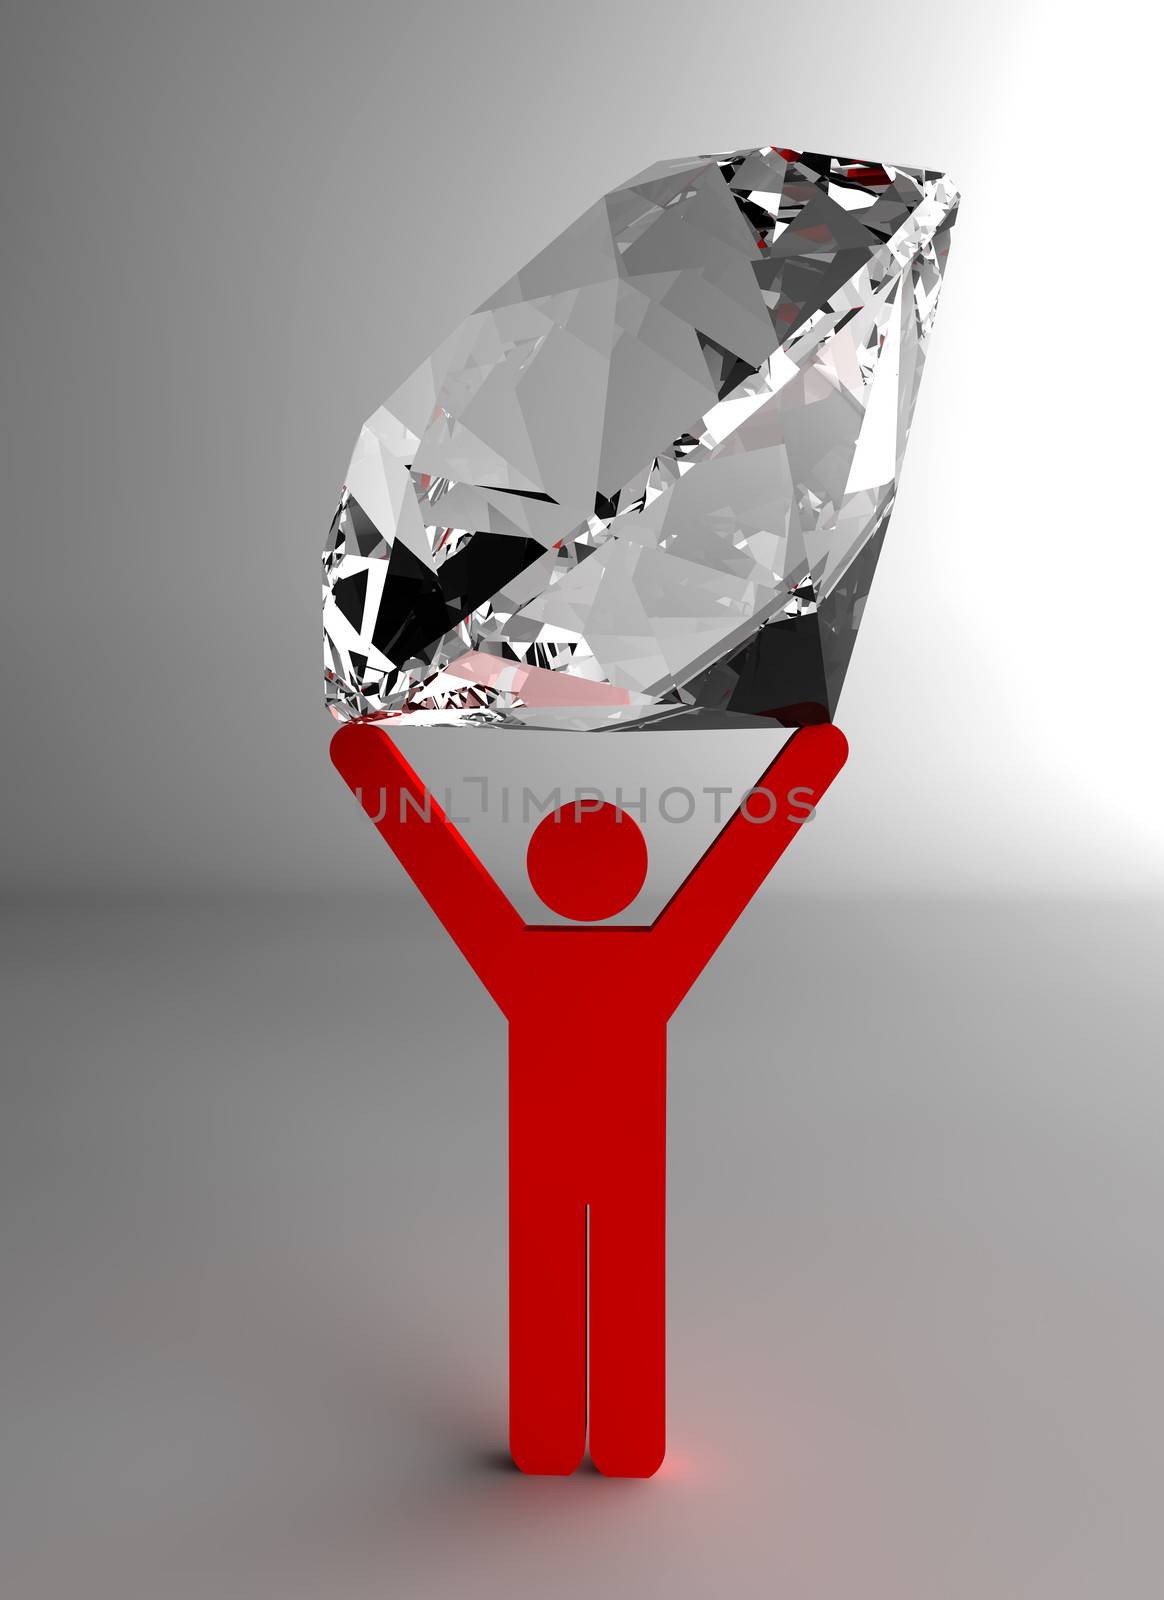 A big diamond supported by a red man